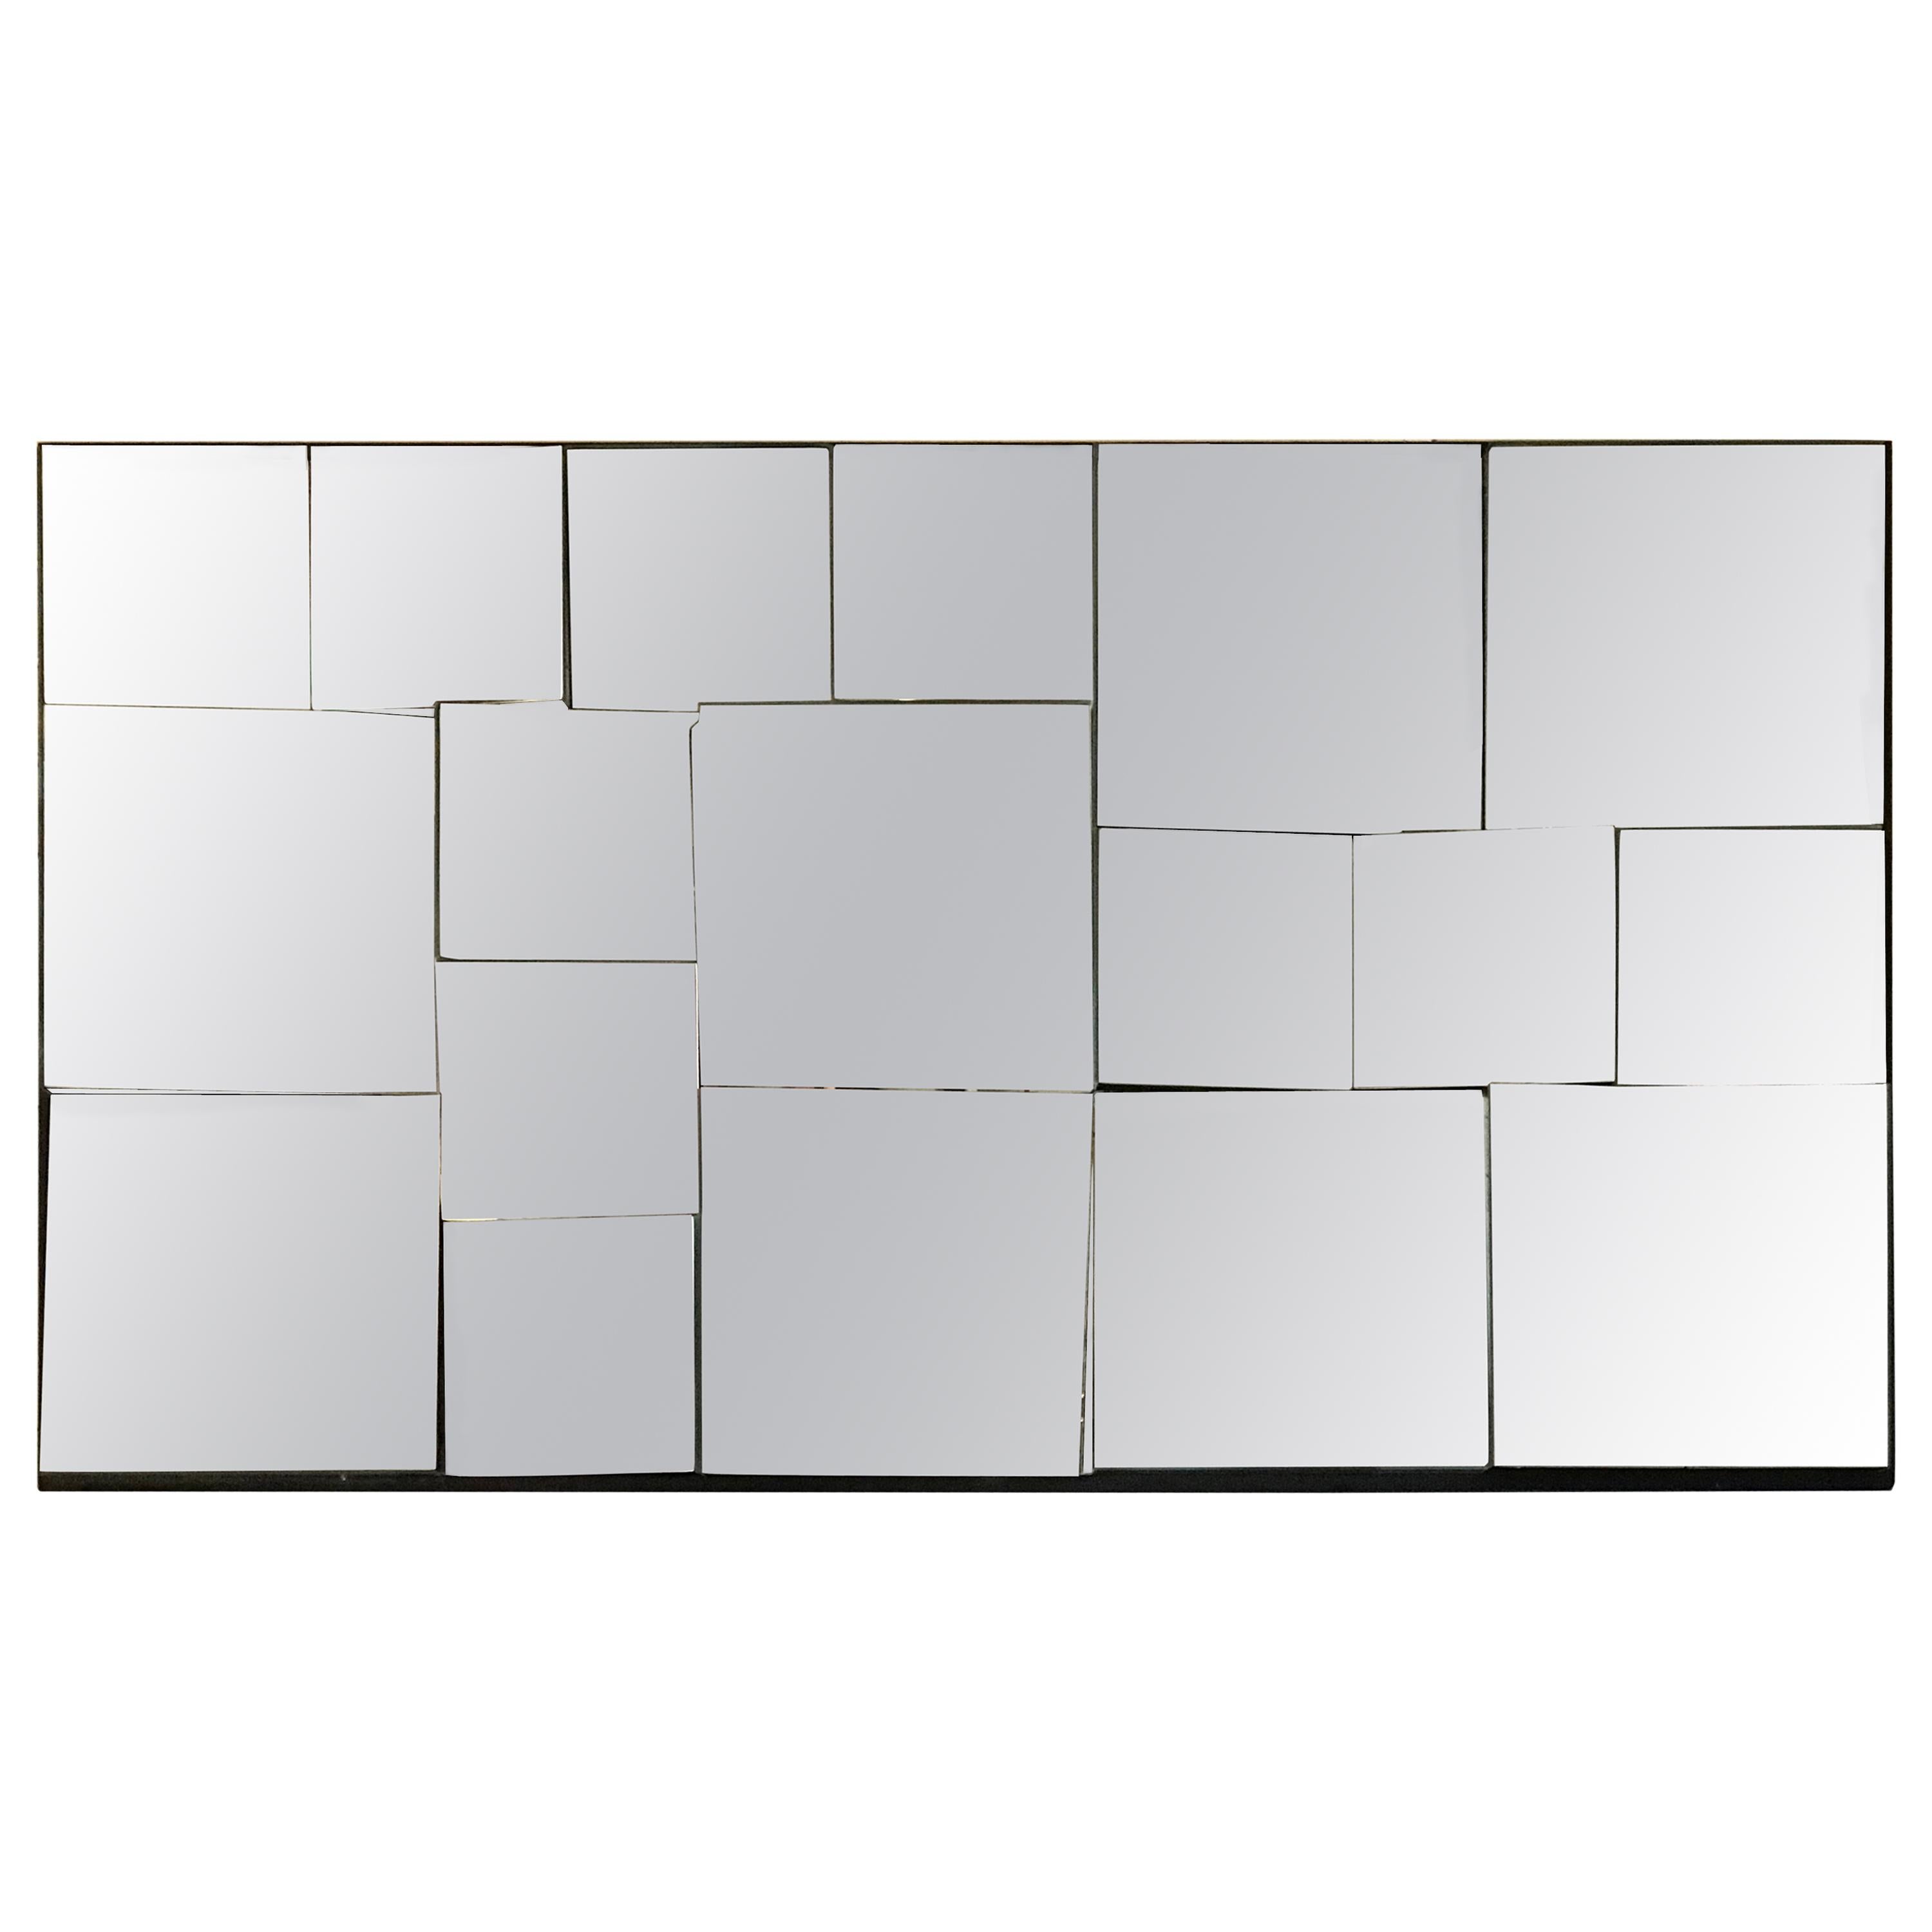 Faceted mirror, mounted on a black painted wood frame.

American born, Neal Small opened his own design firm in the Chelsea neighbourhood of New York City in the 1960s, and is known for being a Pioneer in using plexiglas, Lucite, and